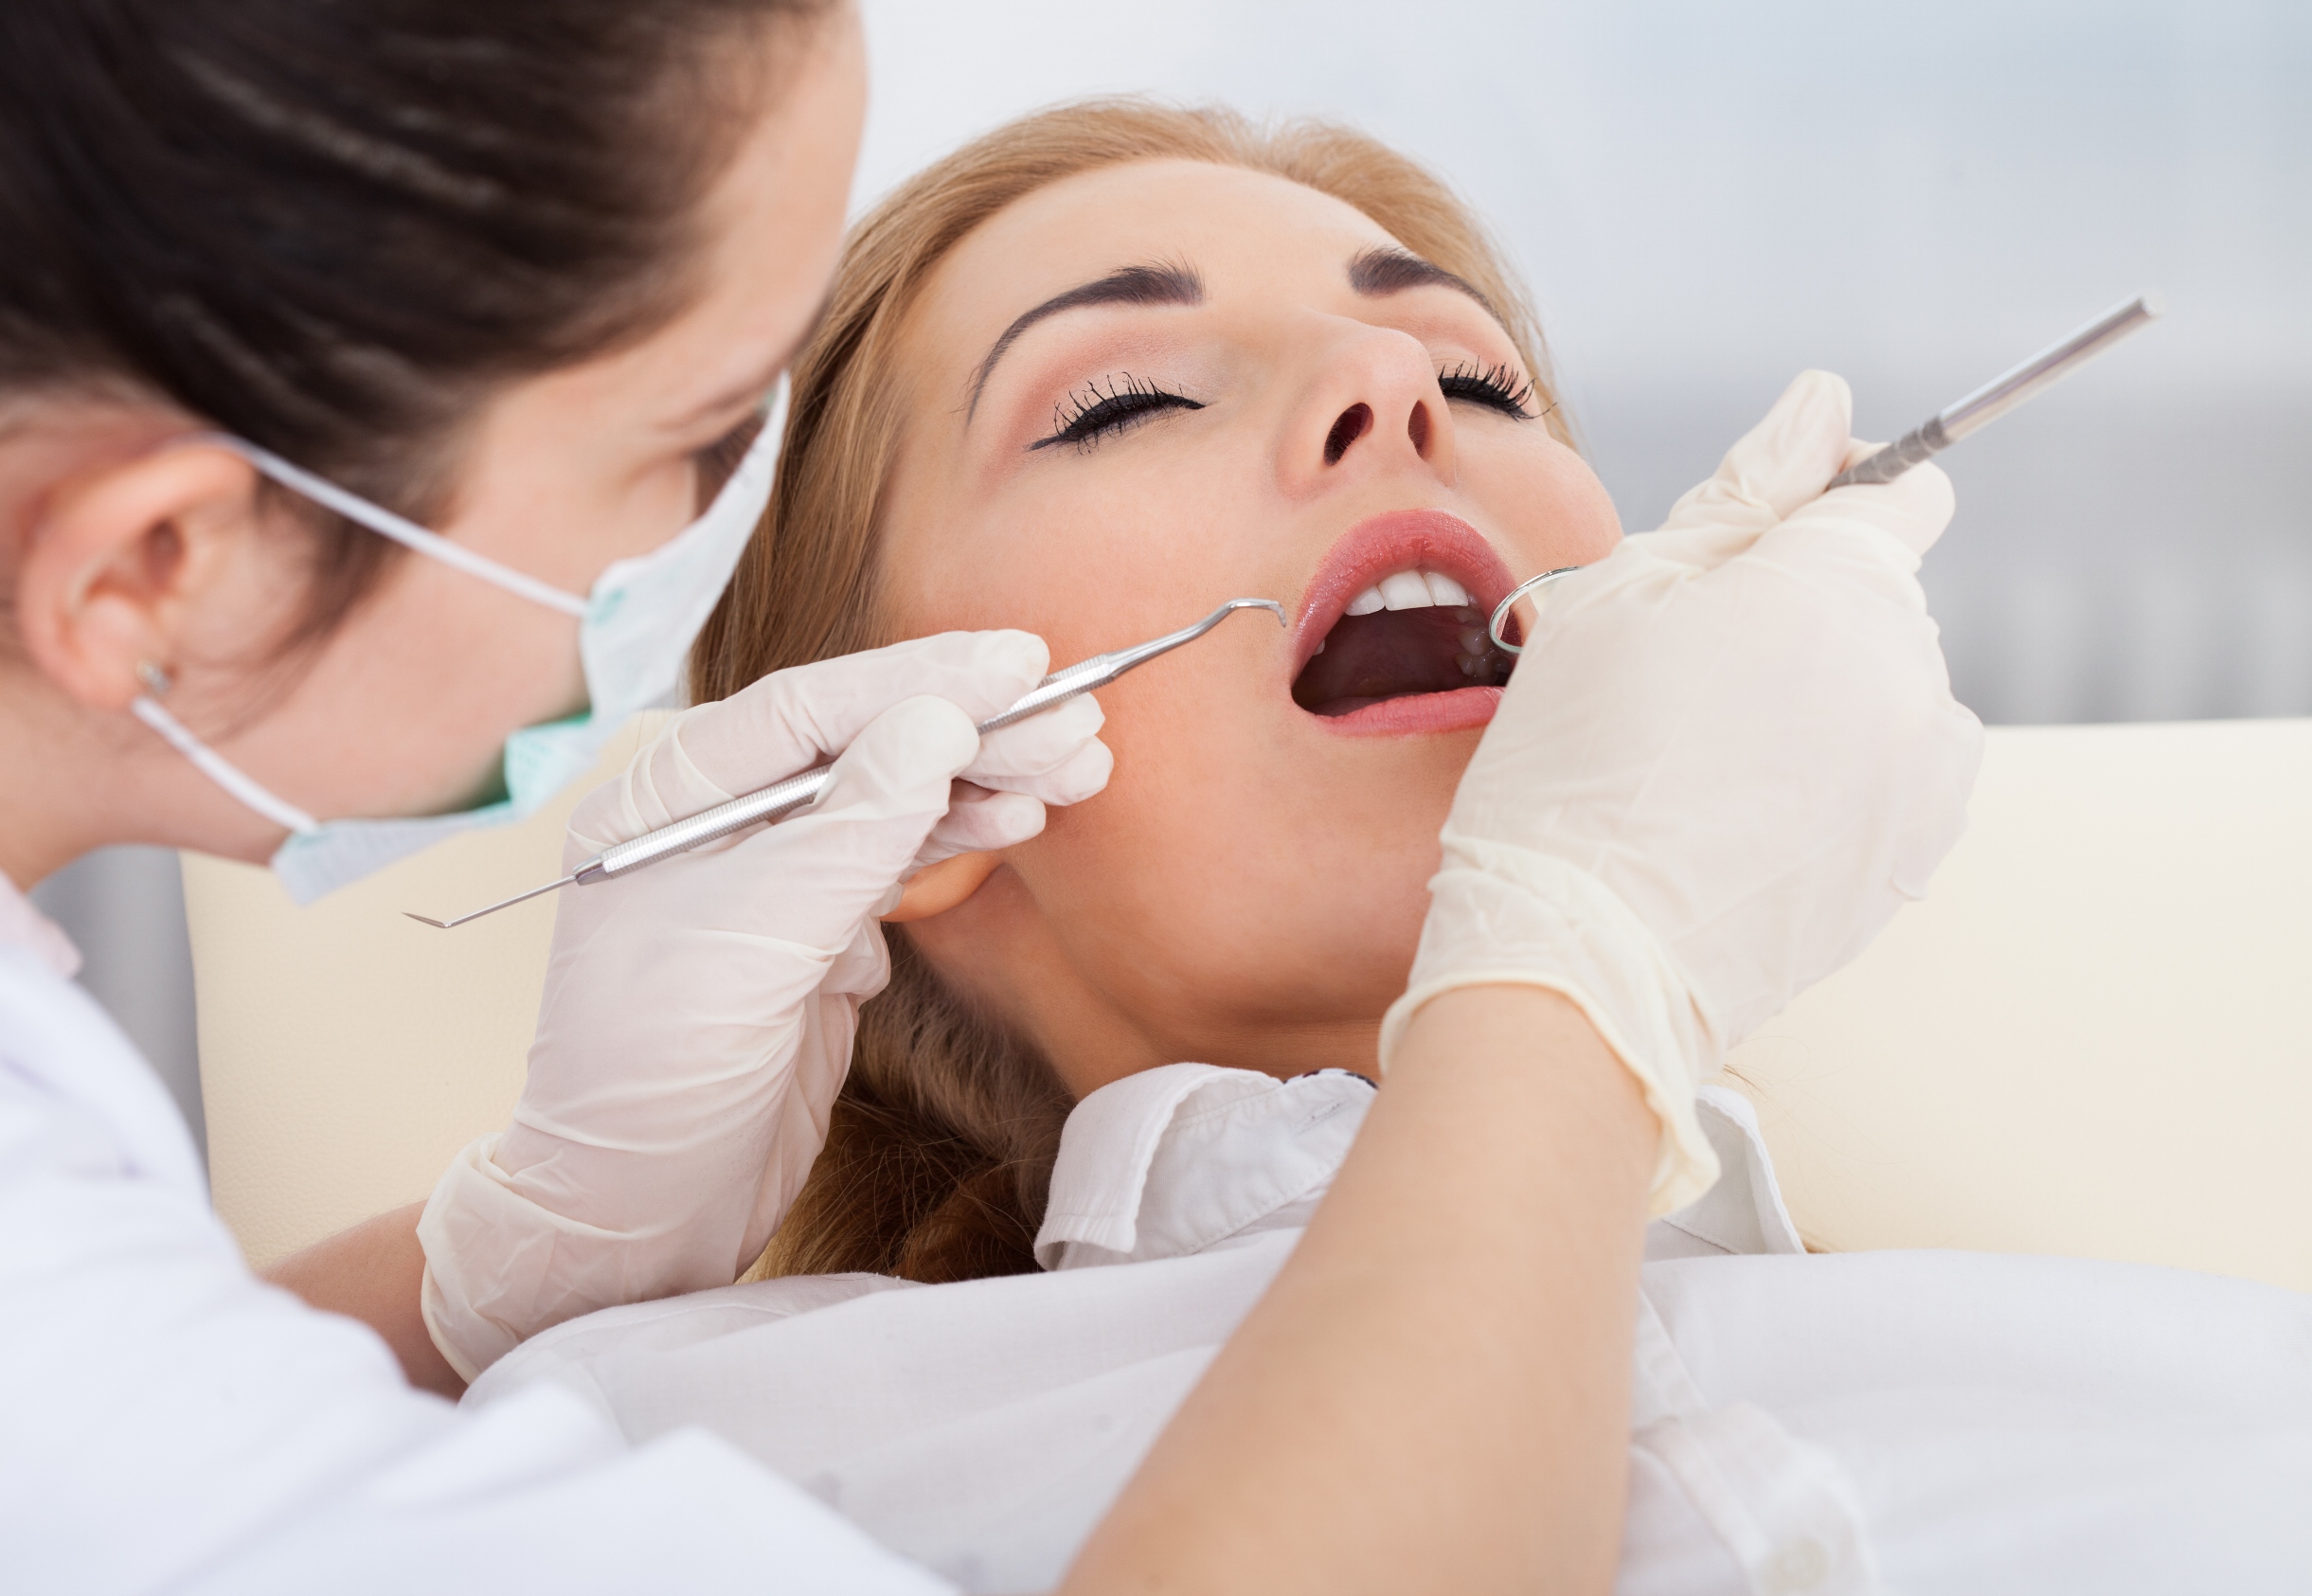 Top Dentists In Sydney For Wisdom Tooth Removal